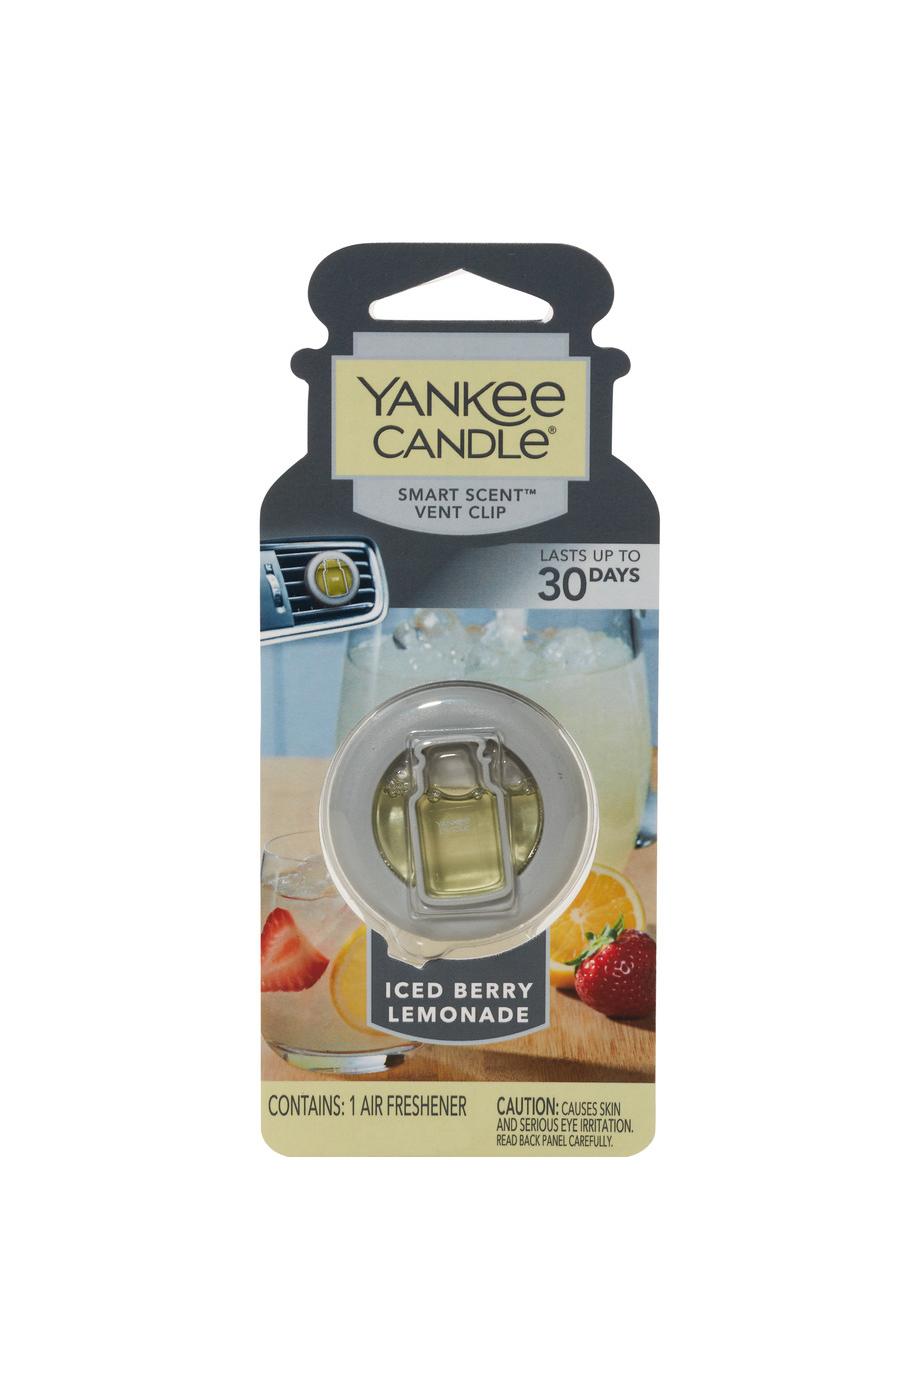 Yankee Candle - Vent Stick Auto